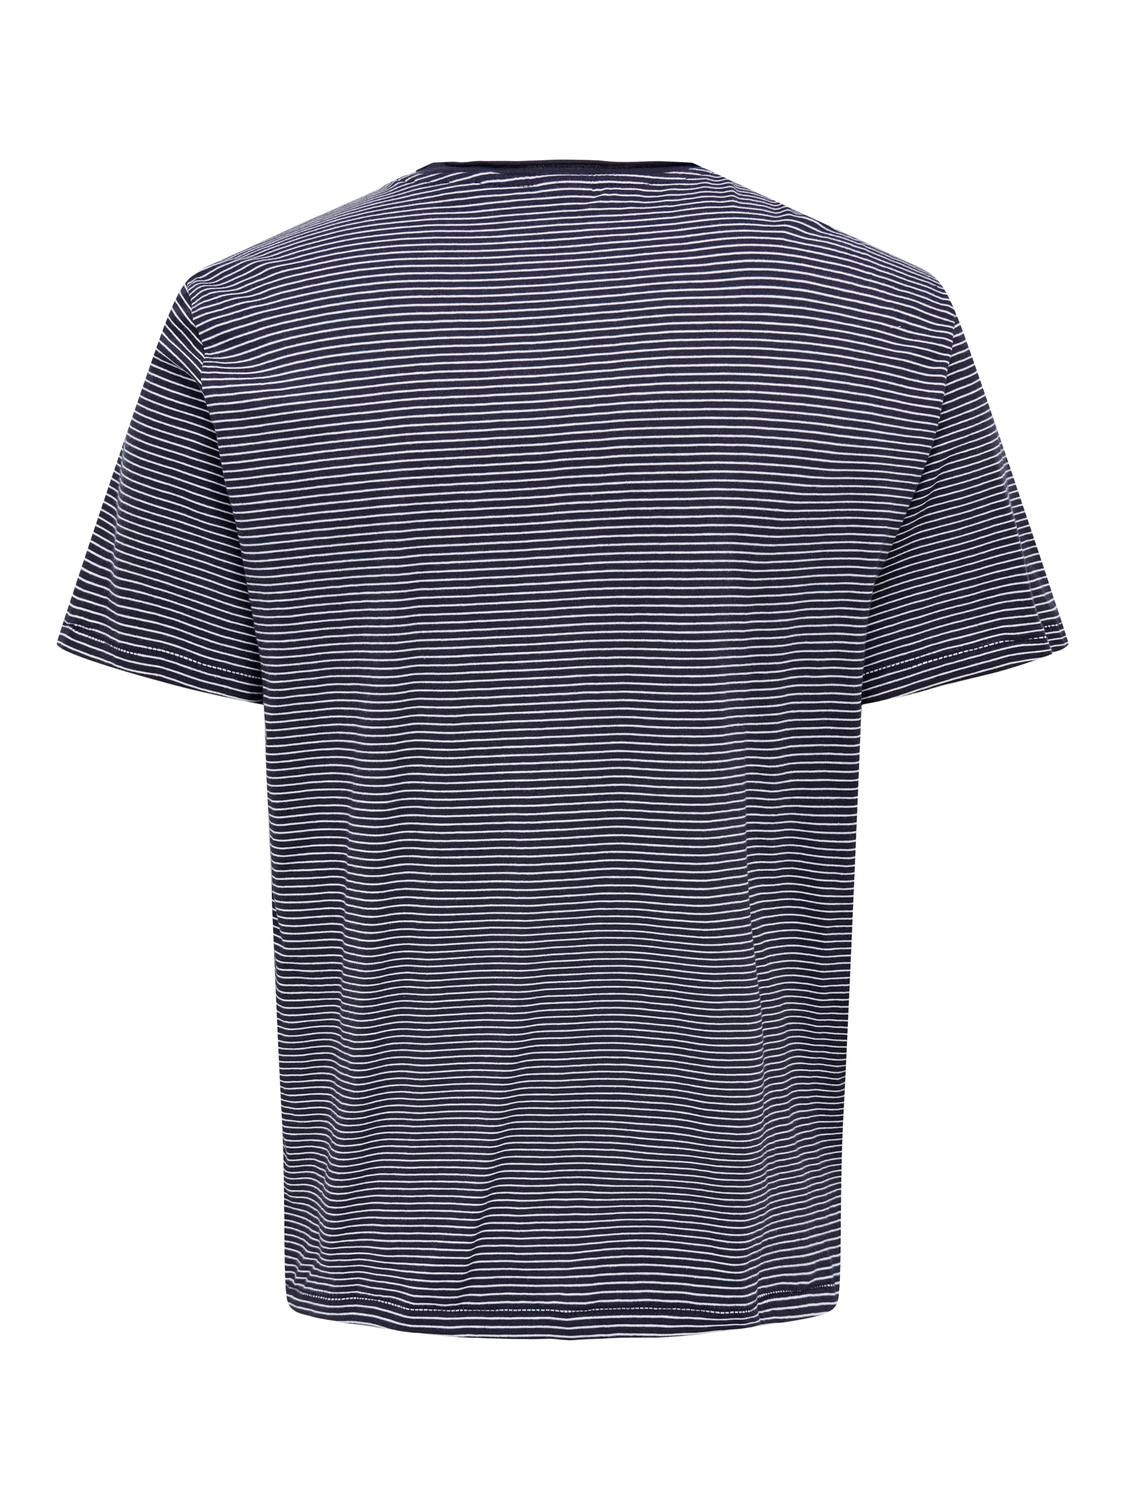 ONLY & SONS Striped o-neck t-shirt with chest pocket -Dark Navy - 22025680